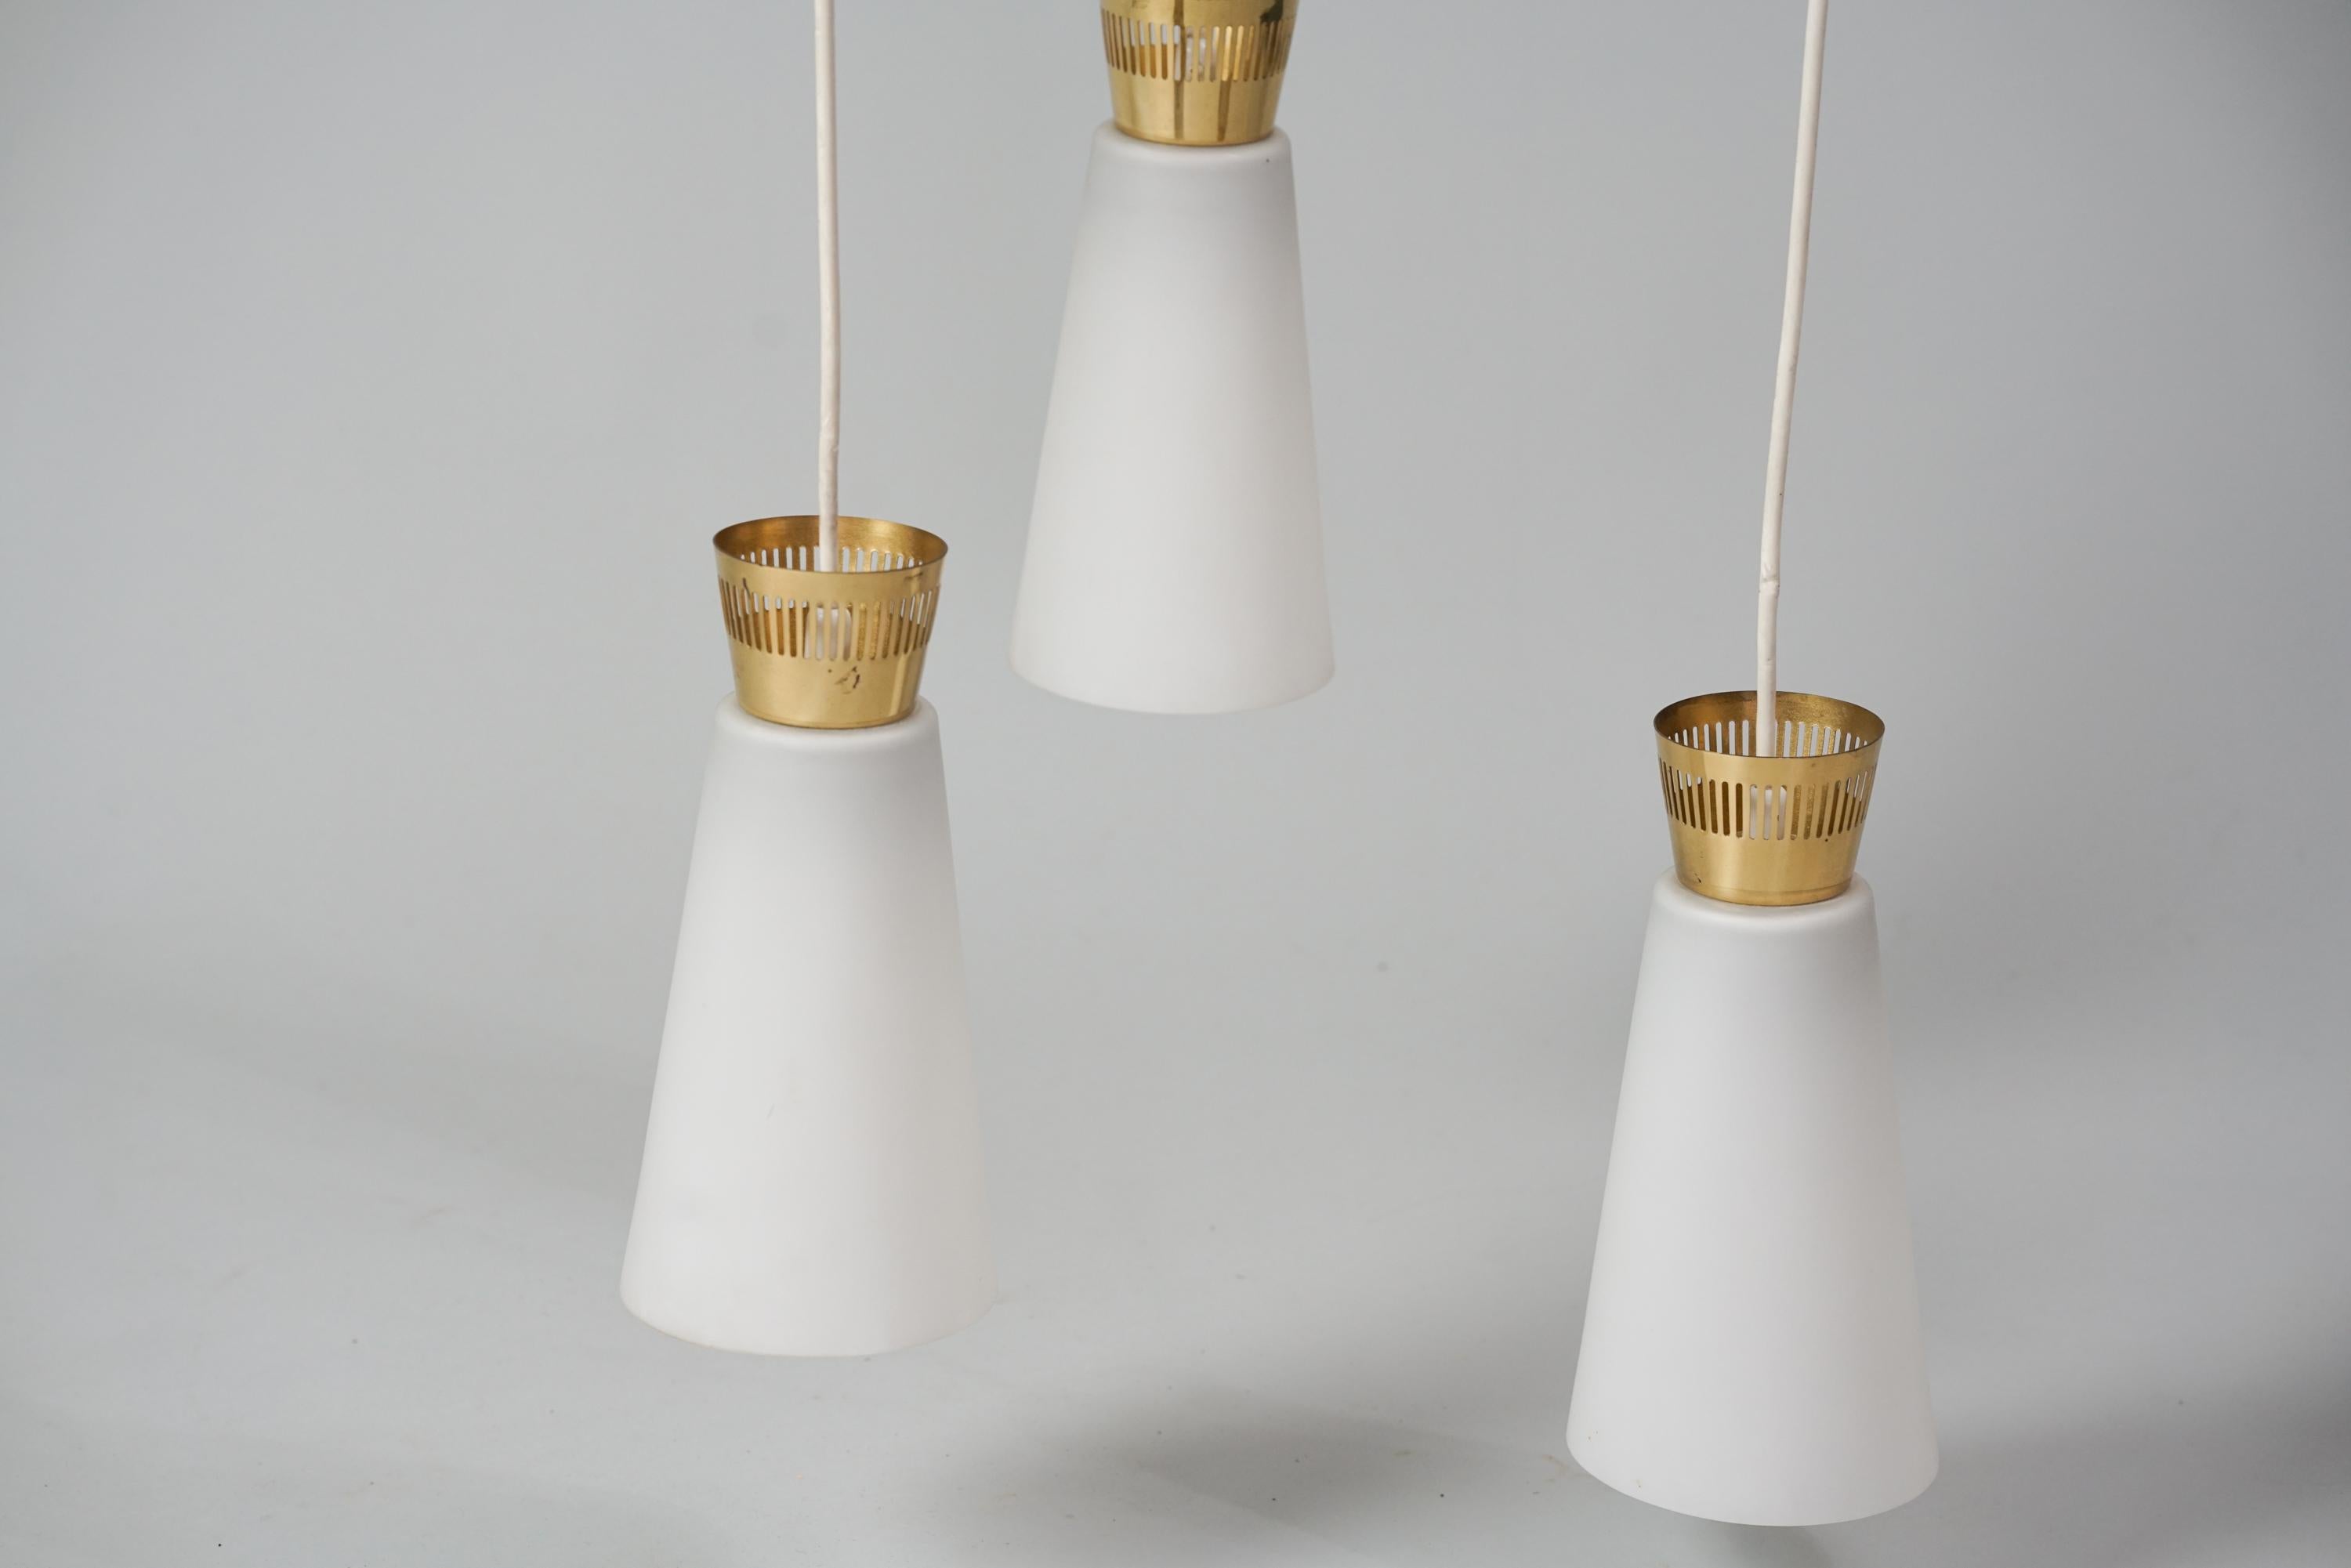 Pendant Model ER 122/3, manufactured Itsu, 1950/1960s. Milk glass shades, brass details. Marked. Good vintage condition, patina consistent with age and use. 


